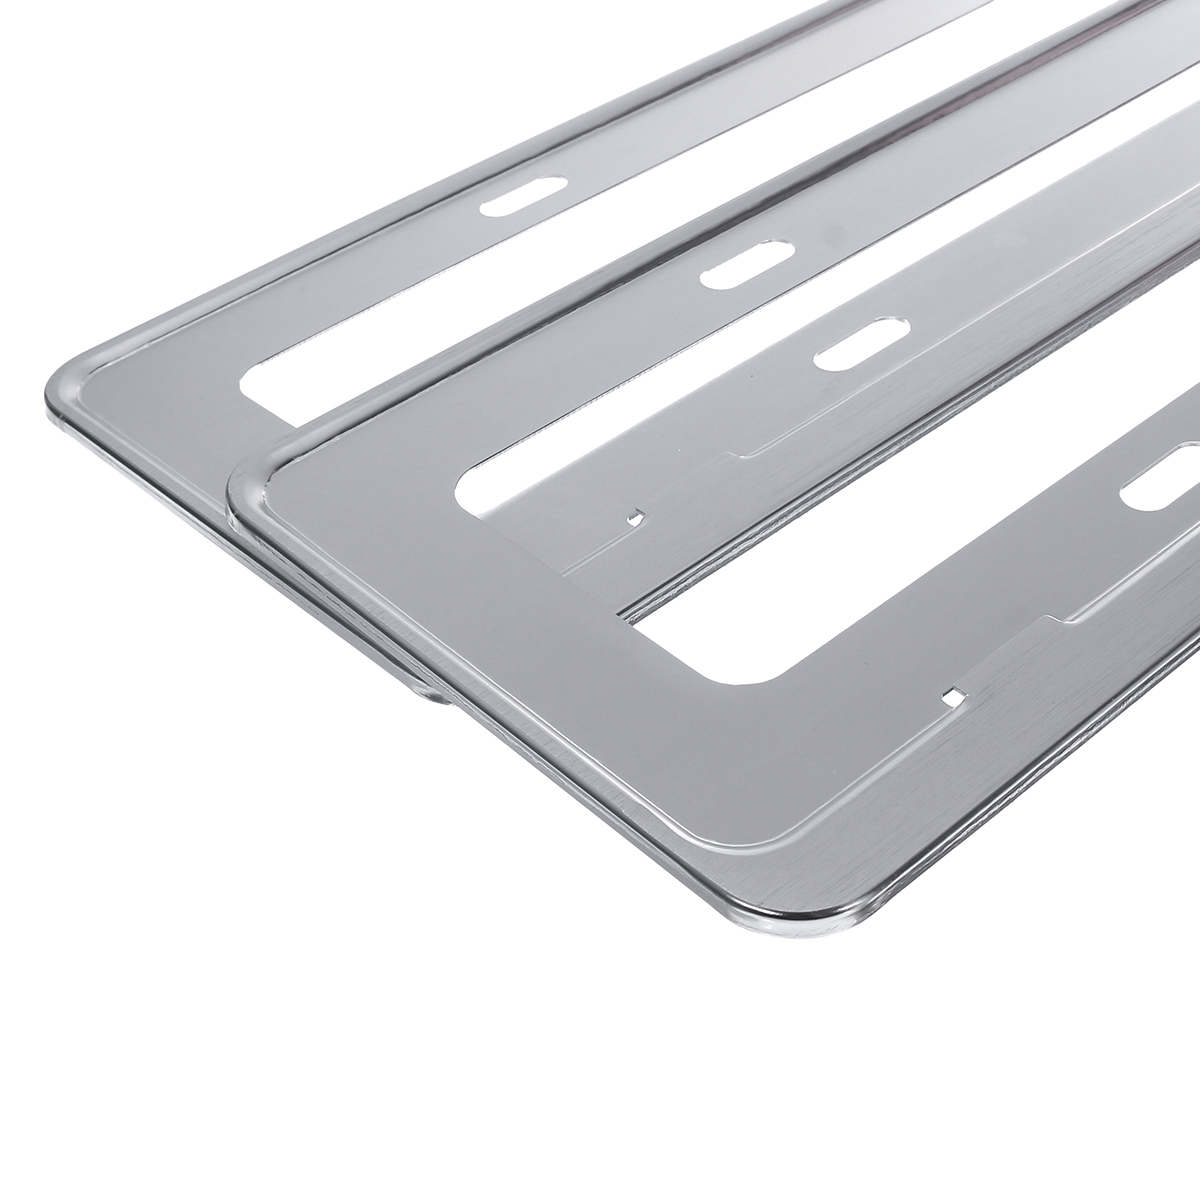 Aluminum Alloy Metal License Plate Frame Shield Professional for Tesla 3/S/X